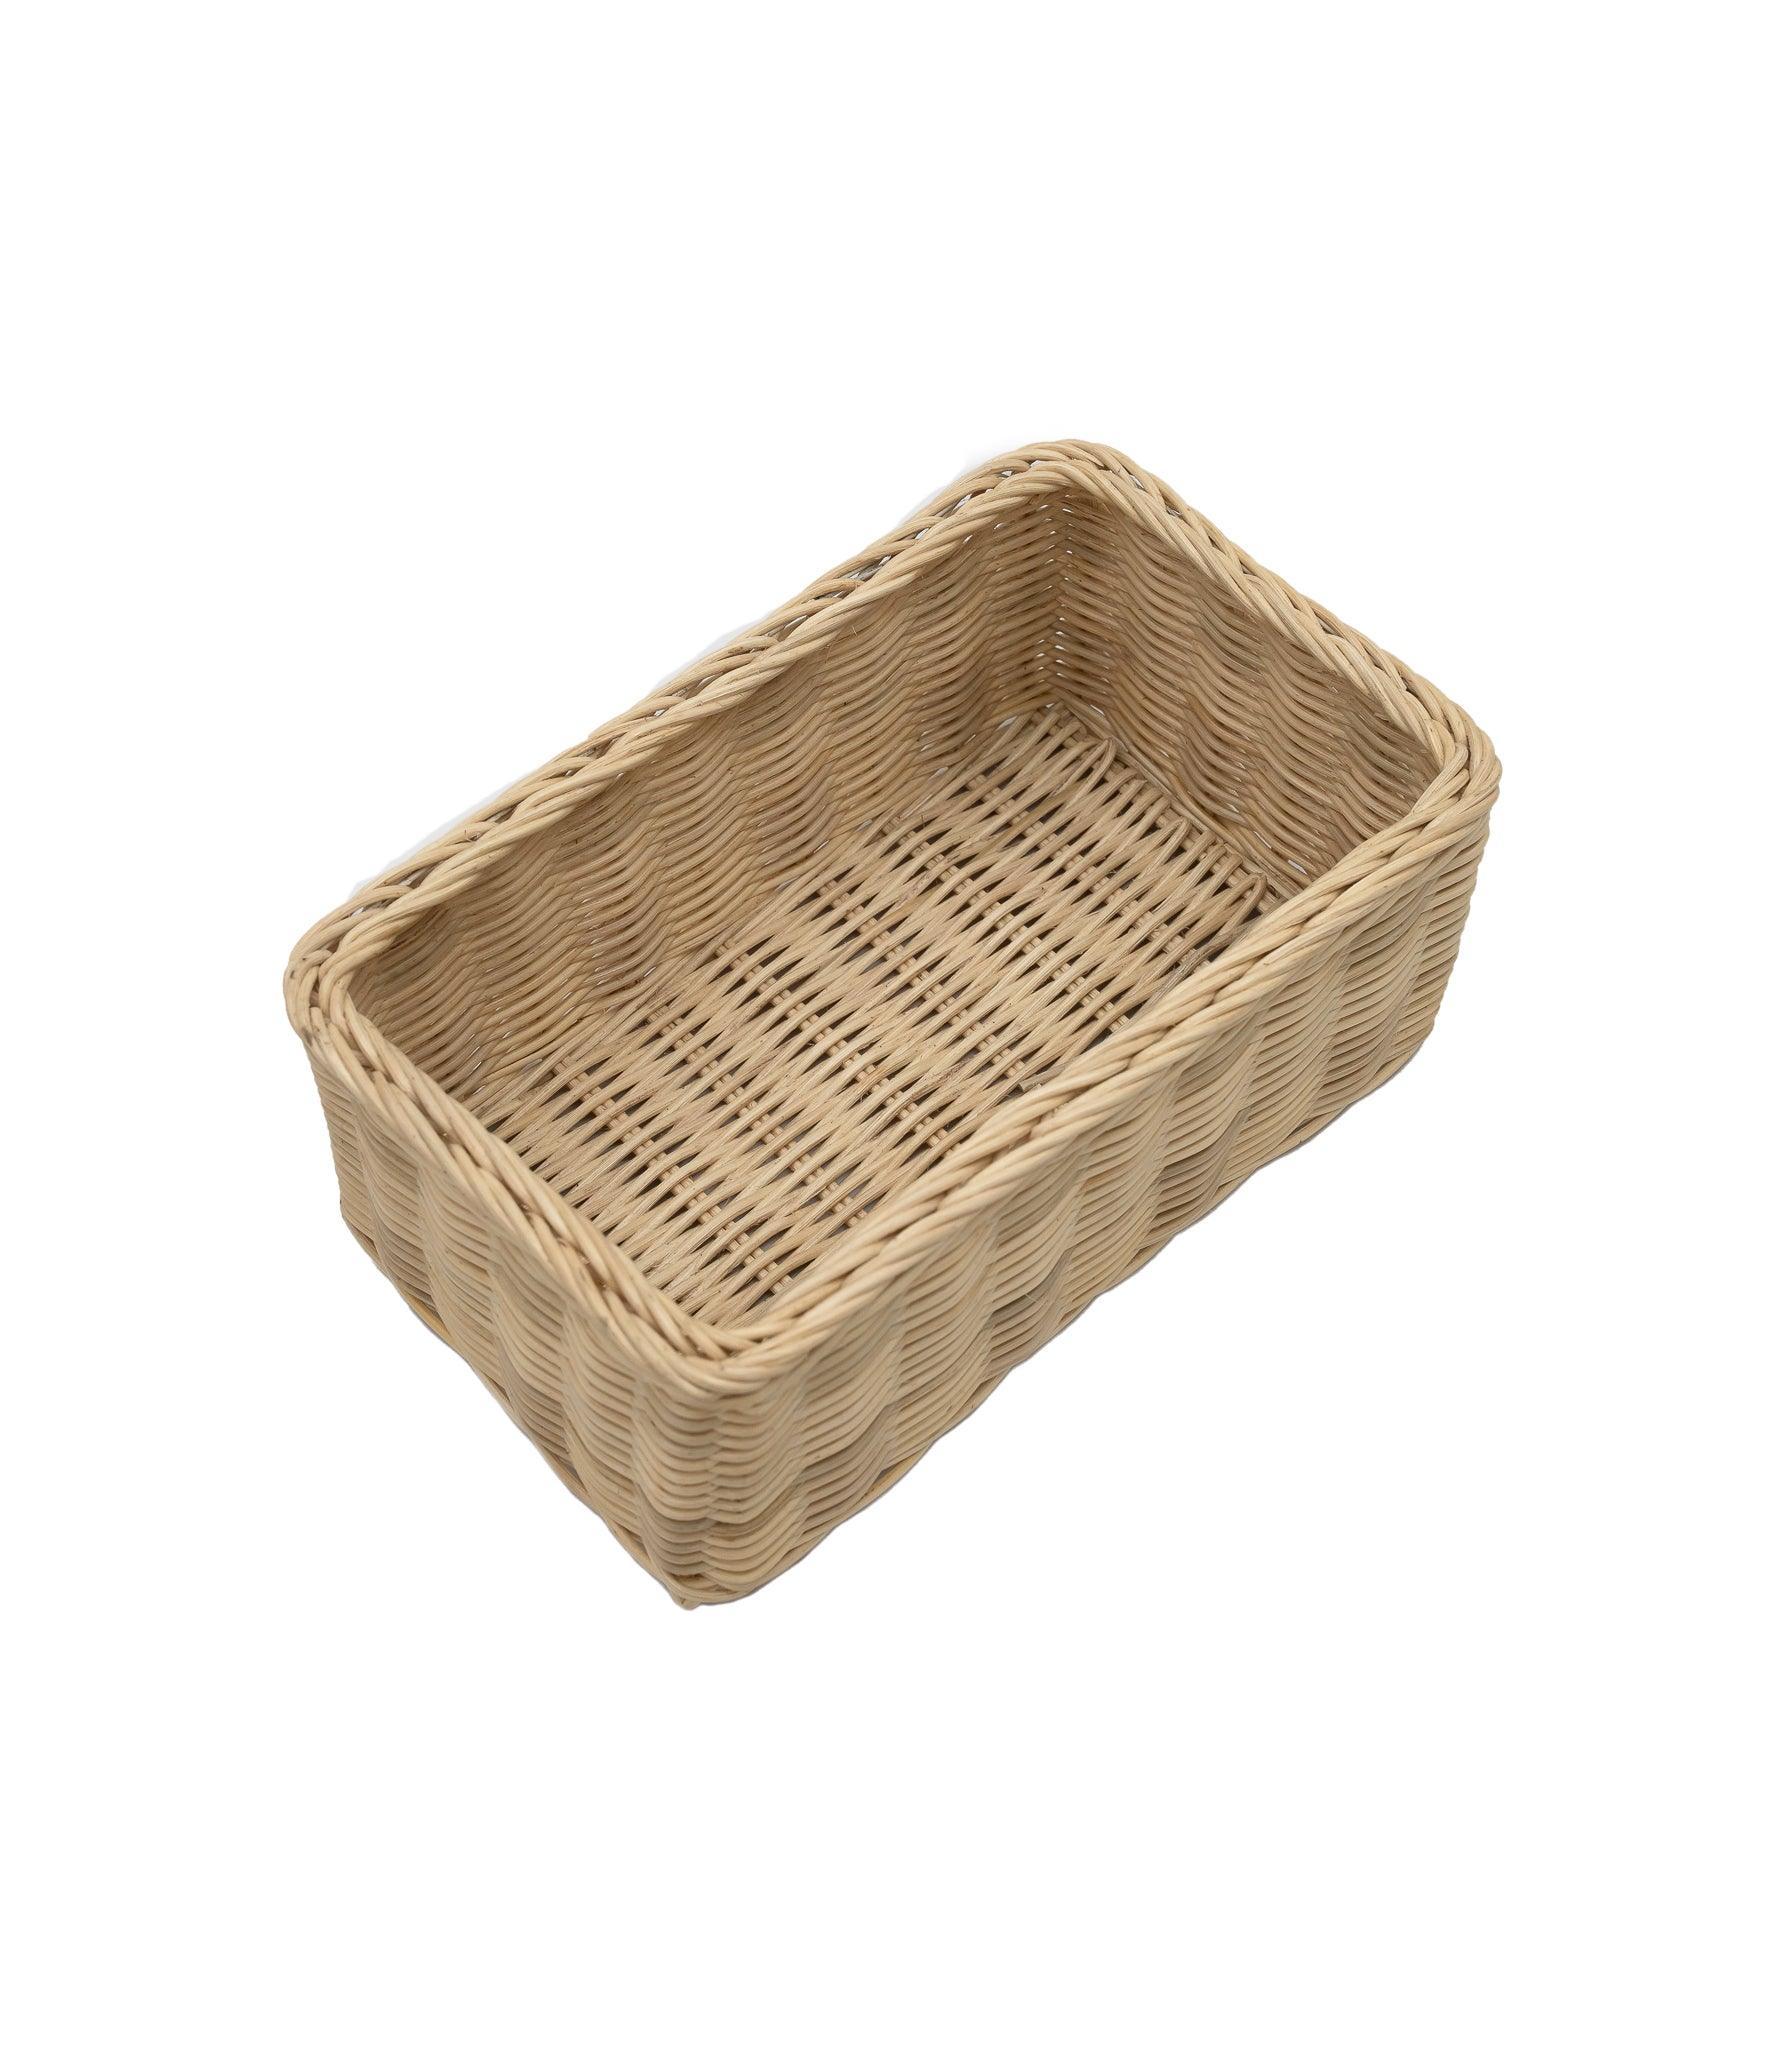 Small Rattan Baskets (Set of 3) - Why and Whale